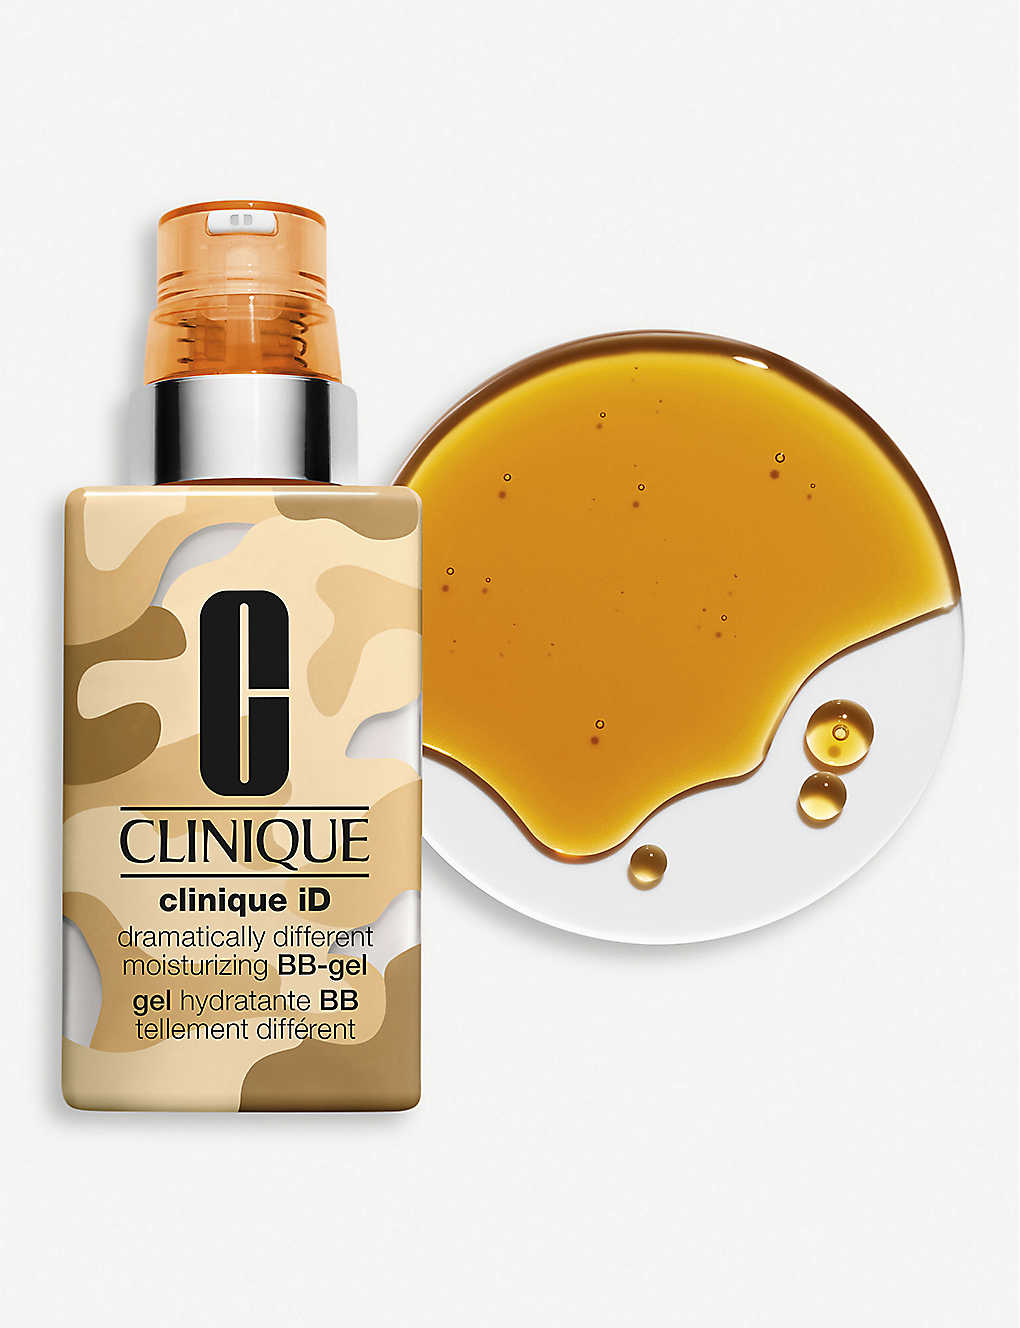 CLINIQUE CLINIQUE ID DRAMATICALLY DIFFERENT MOISTURISING BB-GEL + ACTIVE CARTRIDGE CONCENTRATE FOR FATIGUE 50